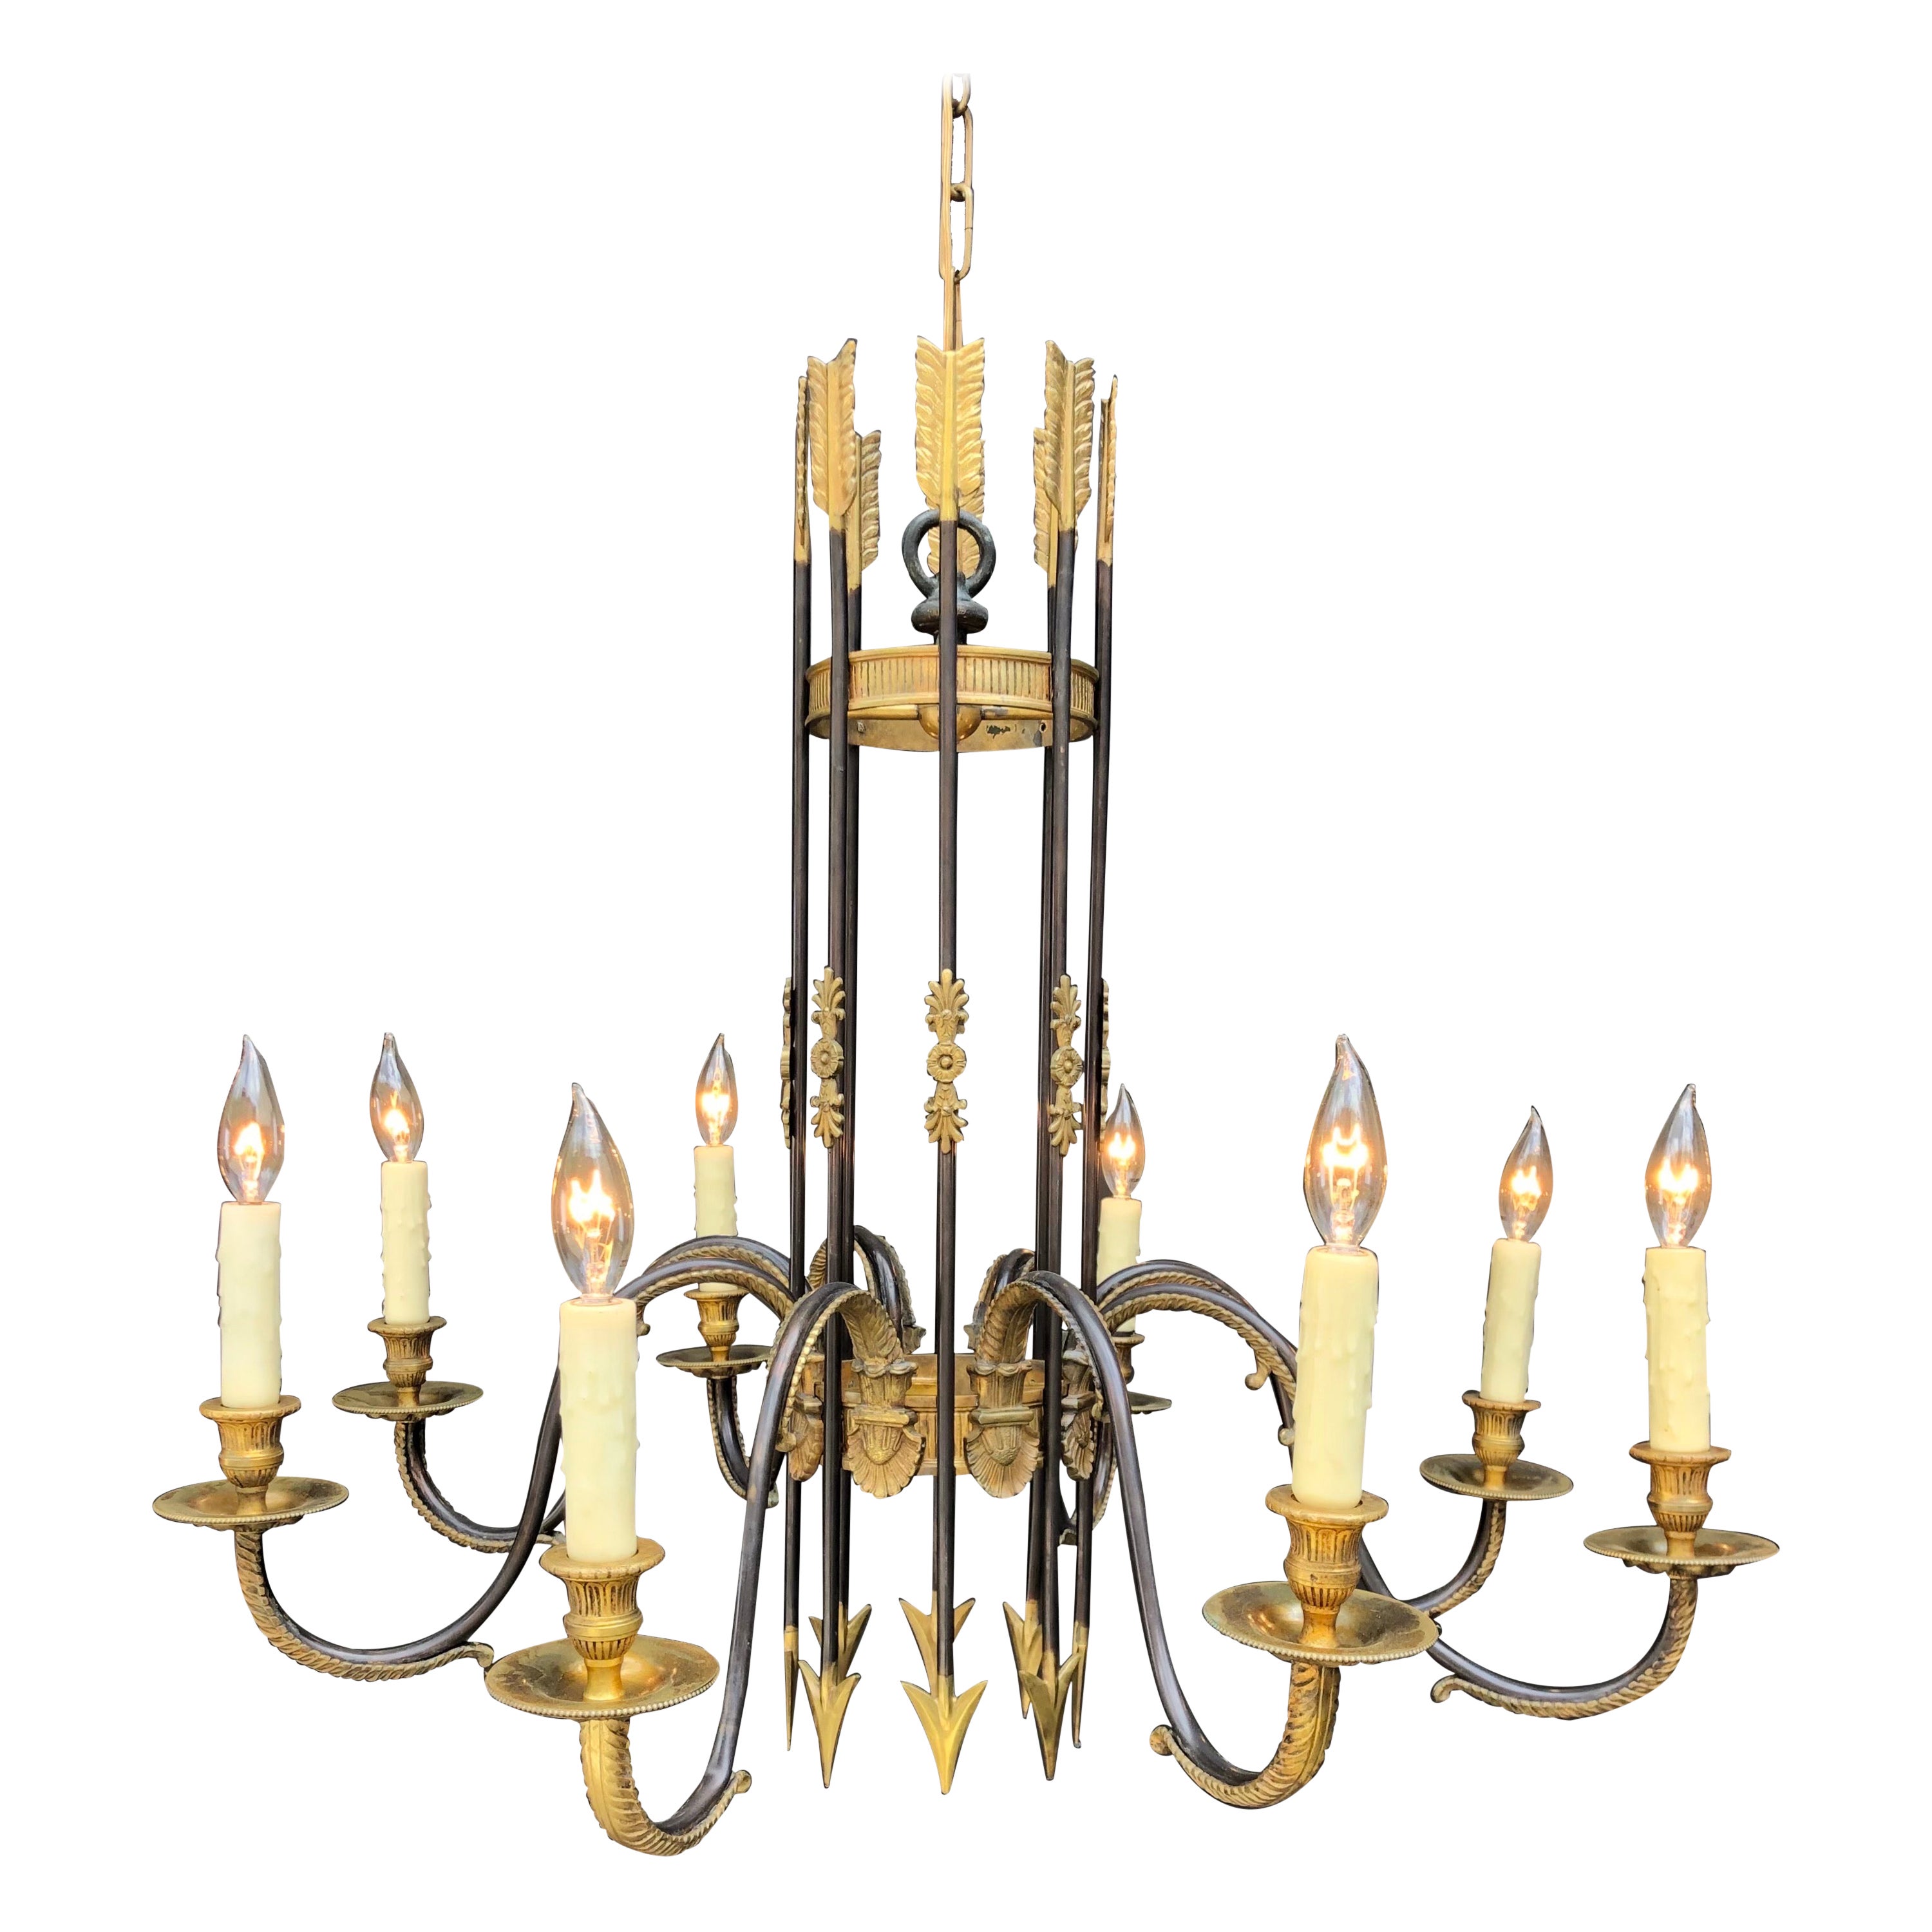 French Directoire Style Gilt and Patina Bronze Chandelier W/ Arrows, Early 20th